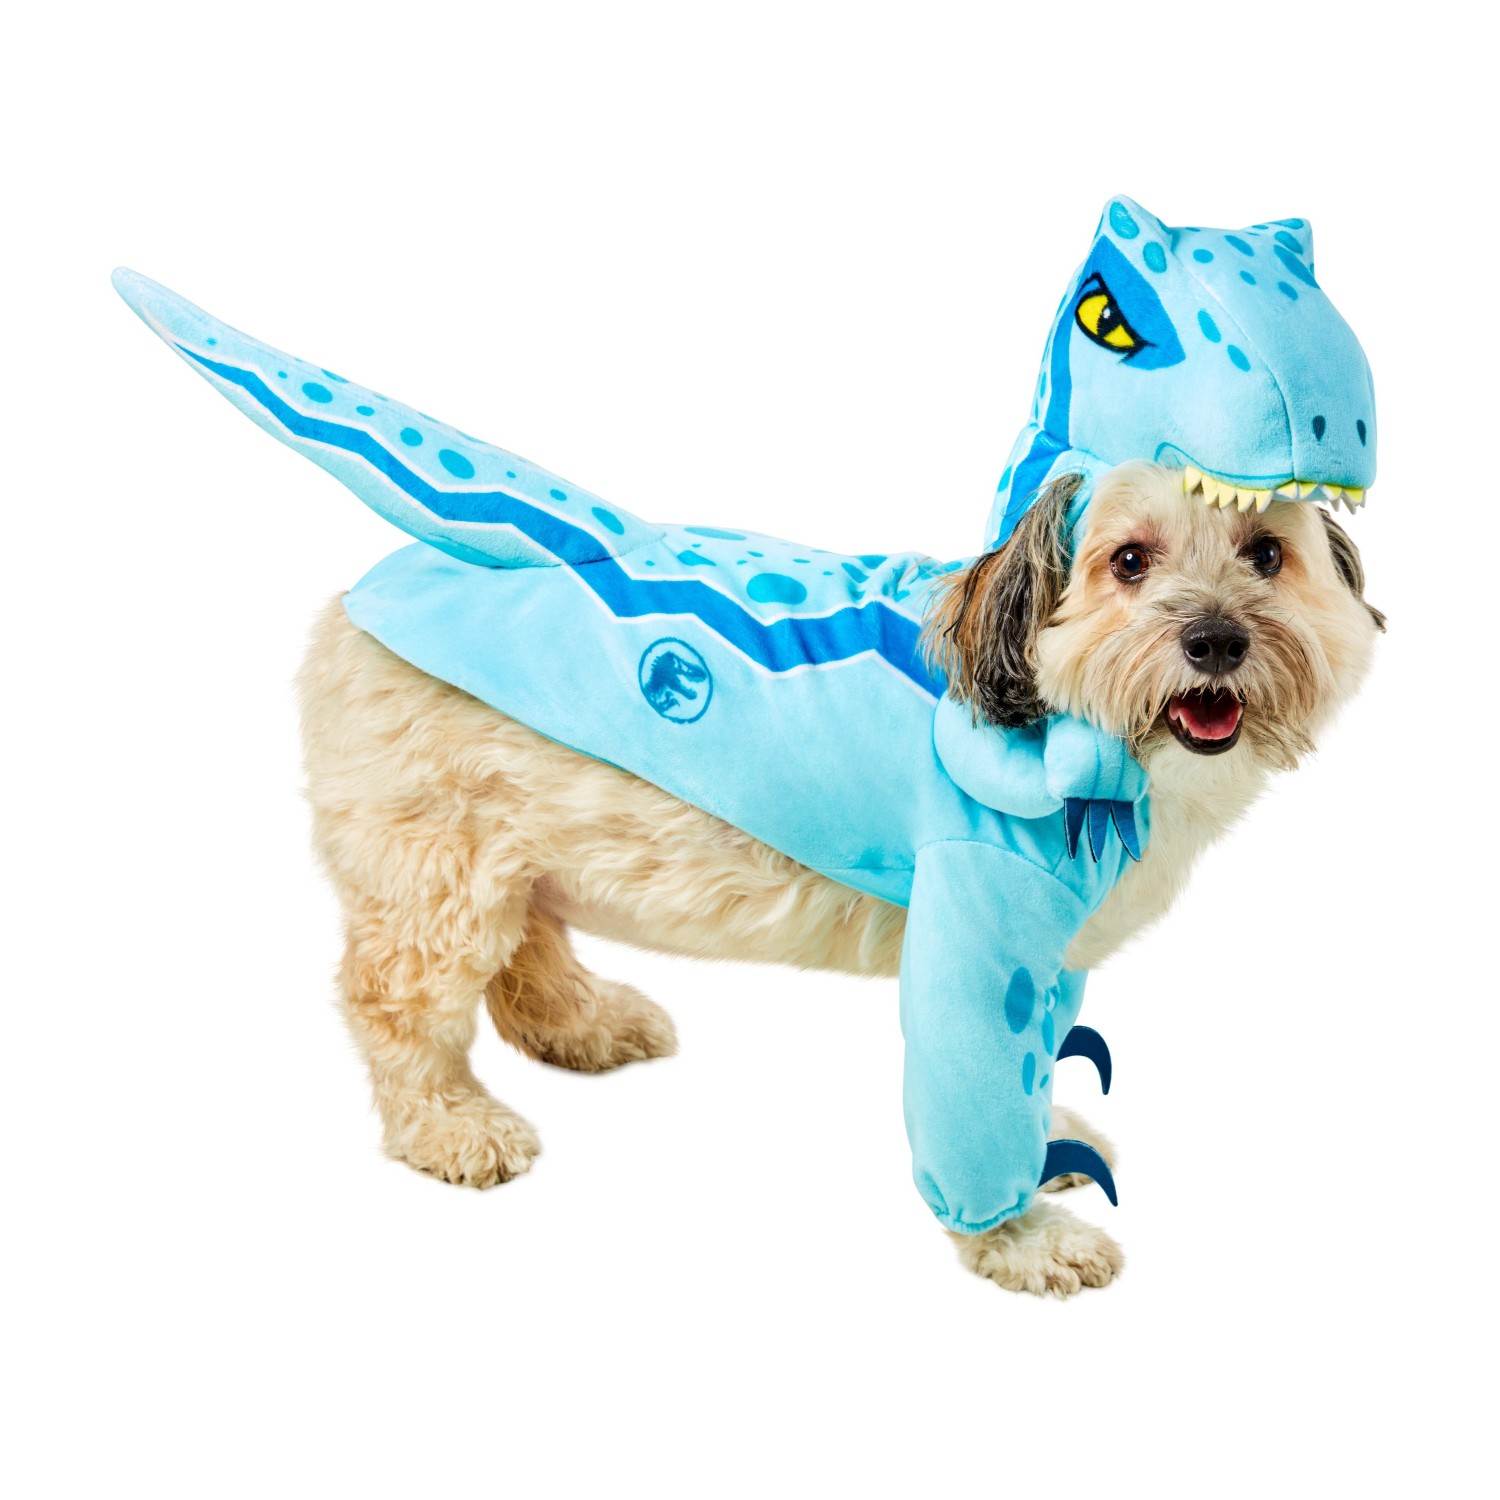 Universal Pets Blue Dog Costume by Rubies